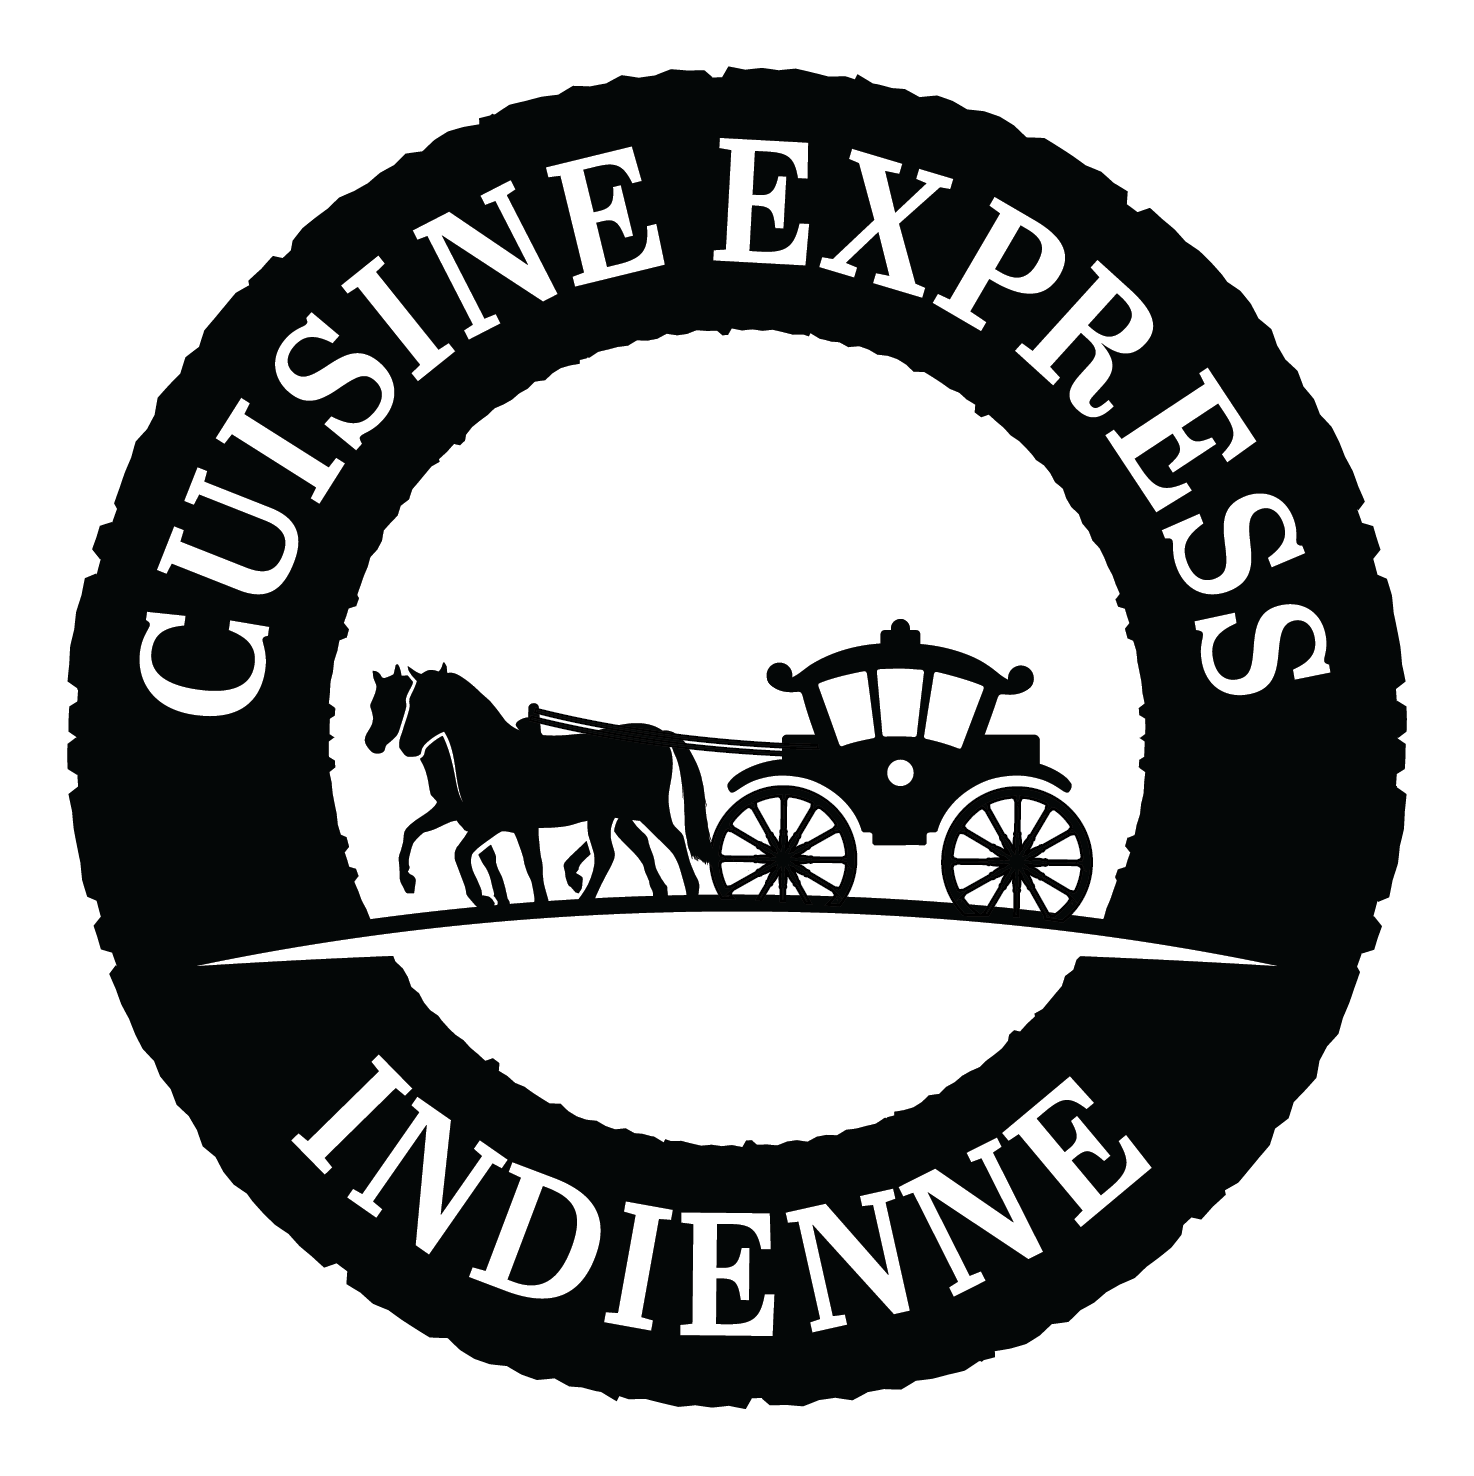 CuisineExpressIndienne-Logo-Small-10.png